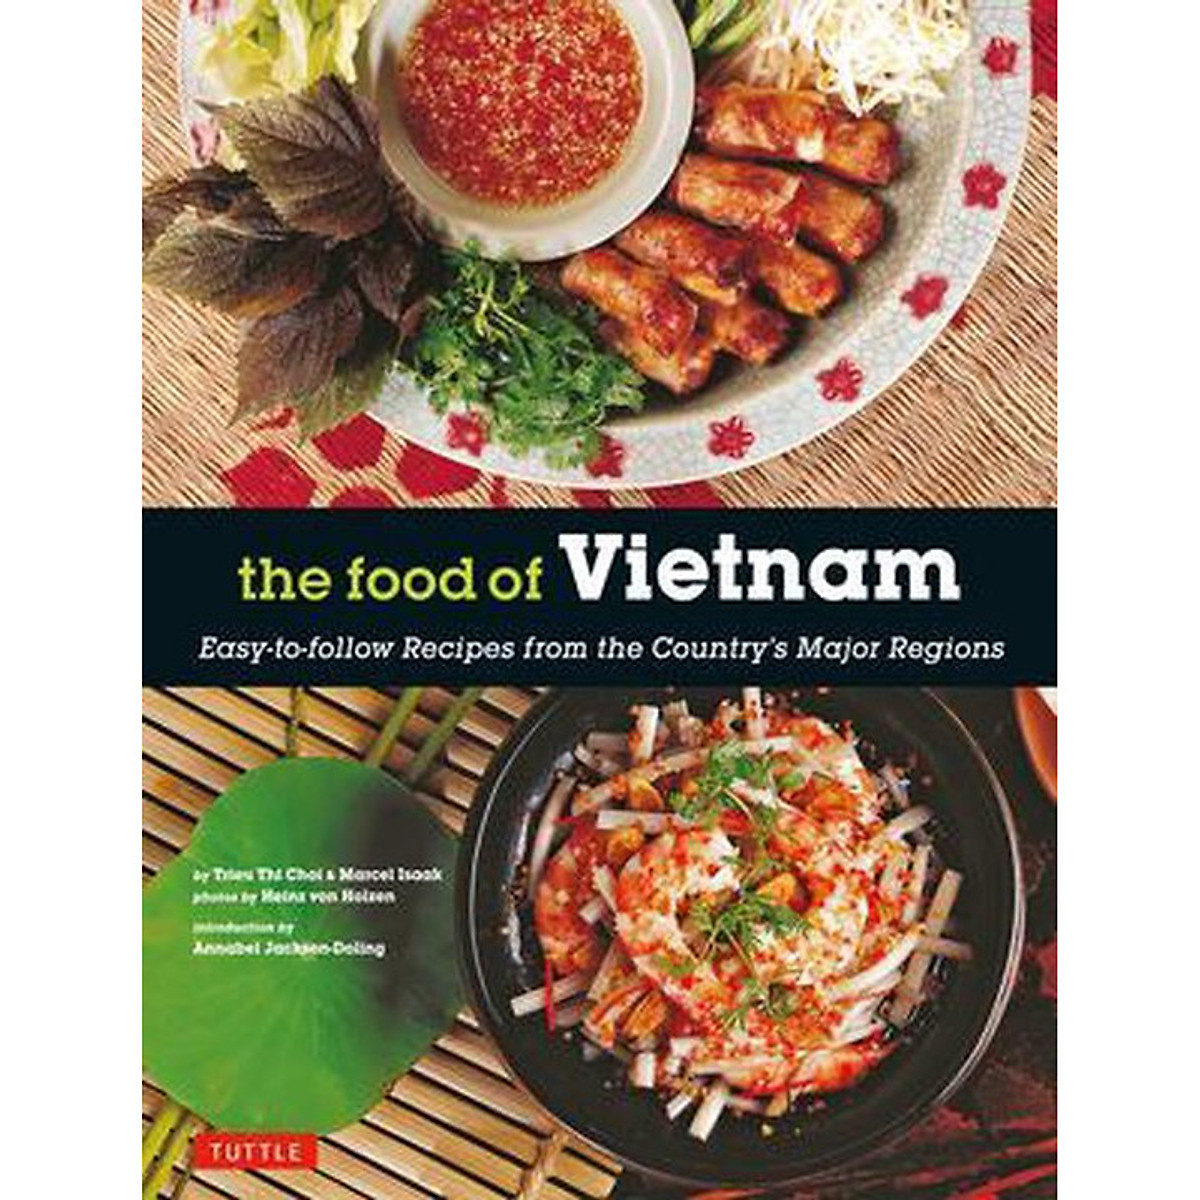  The Food of Vietnam : Easy-to-Follow Recipes from the Country's Major Regions